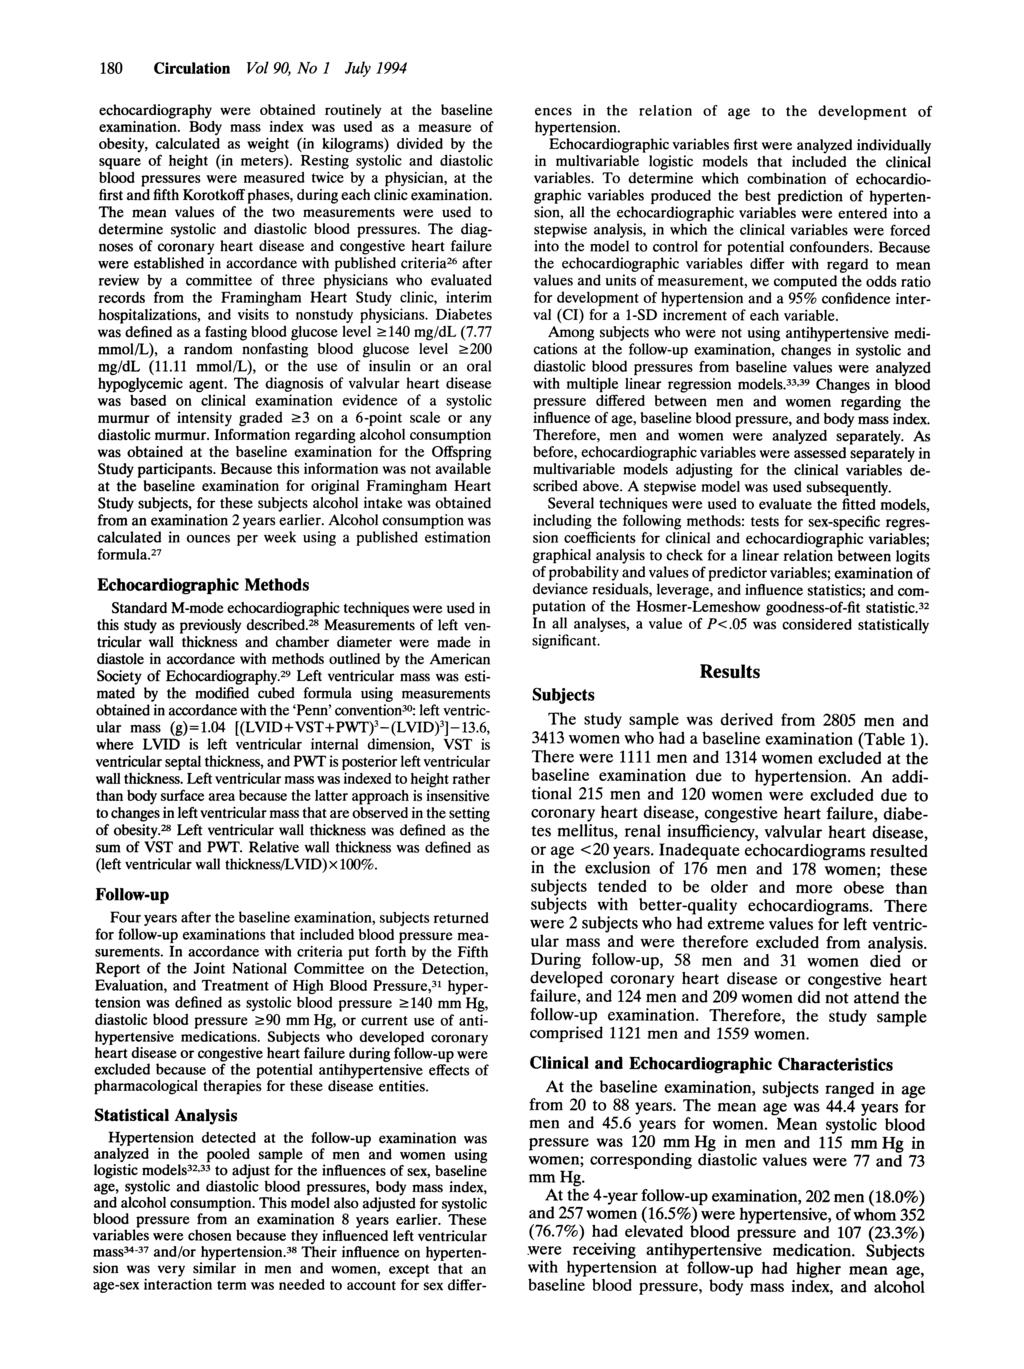 Downloaded from http://ahajournals.org by on November 27, 218 18 Circulation Vol 9, No 1 July 1994 echocardiography were obtained routinely at the baseline examination.